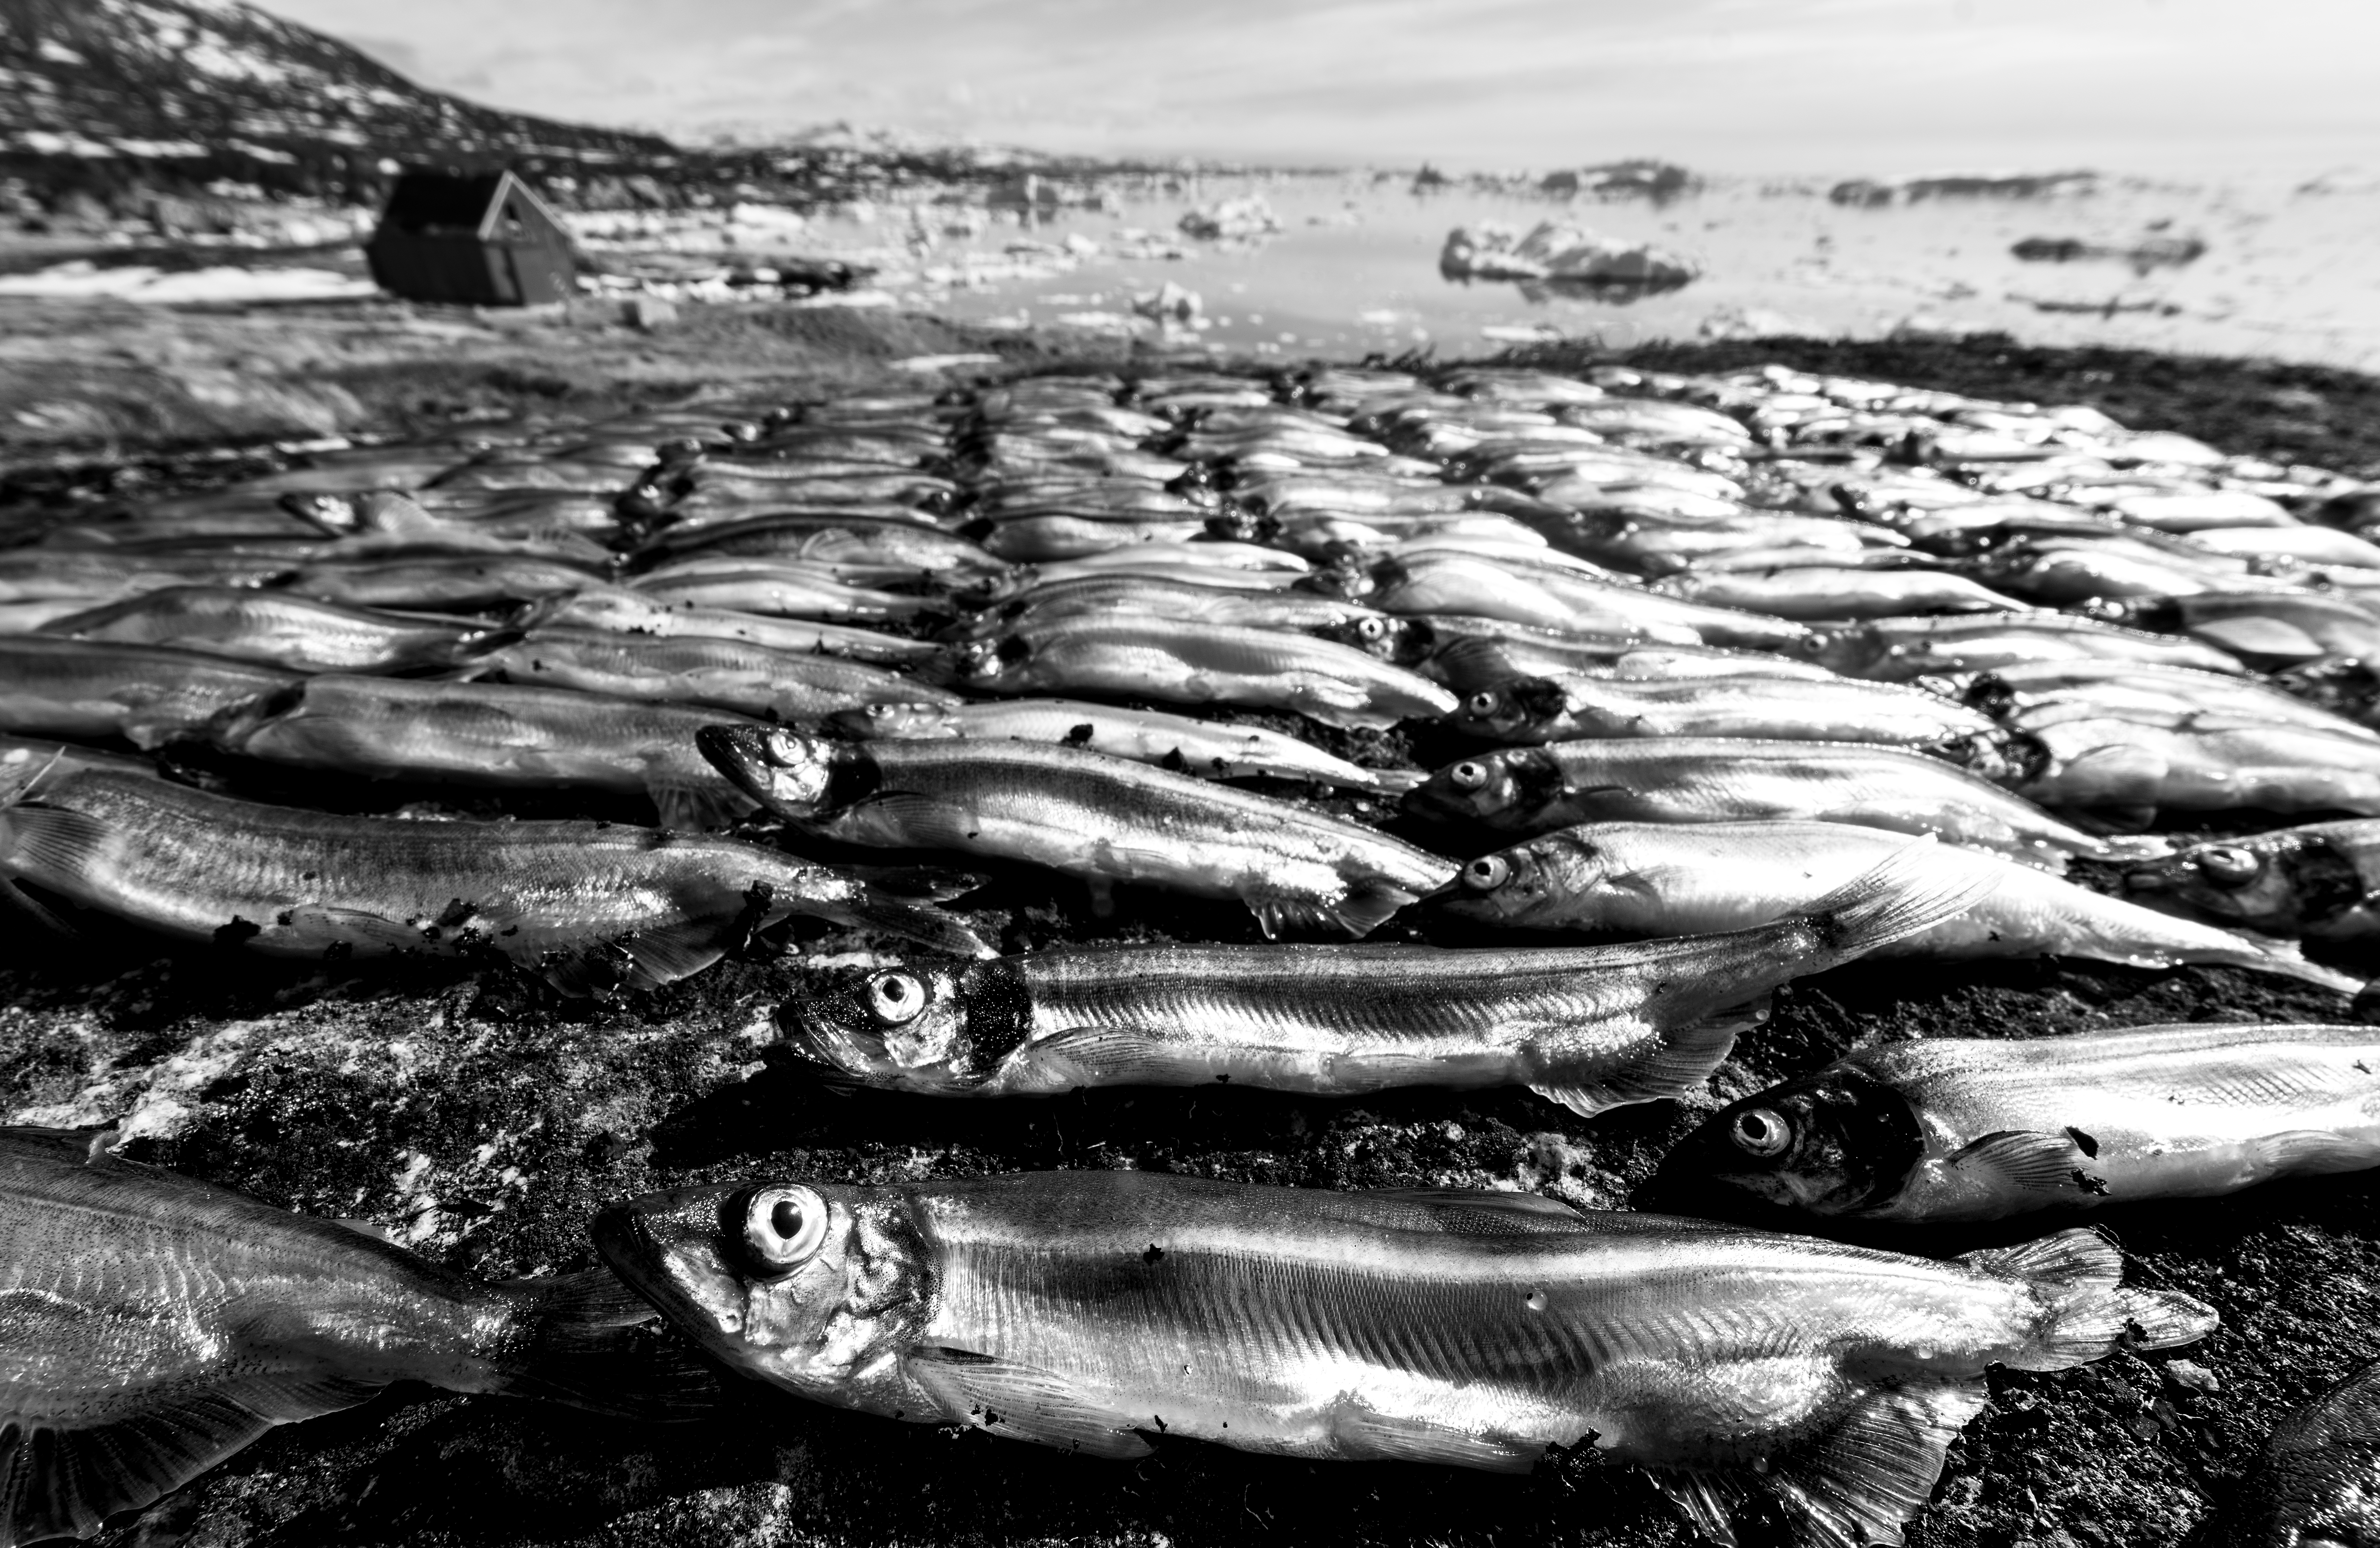 Long, uniform rows of a large number of small fish, capelin, caught in the spring for a family’s winter use. The fish are set out to dry naturally on rocks to retain their nutritional value. The sea with some ice is visible in the background.